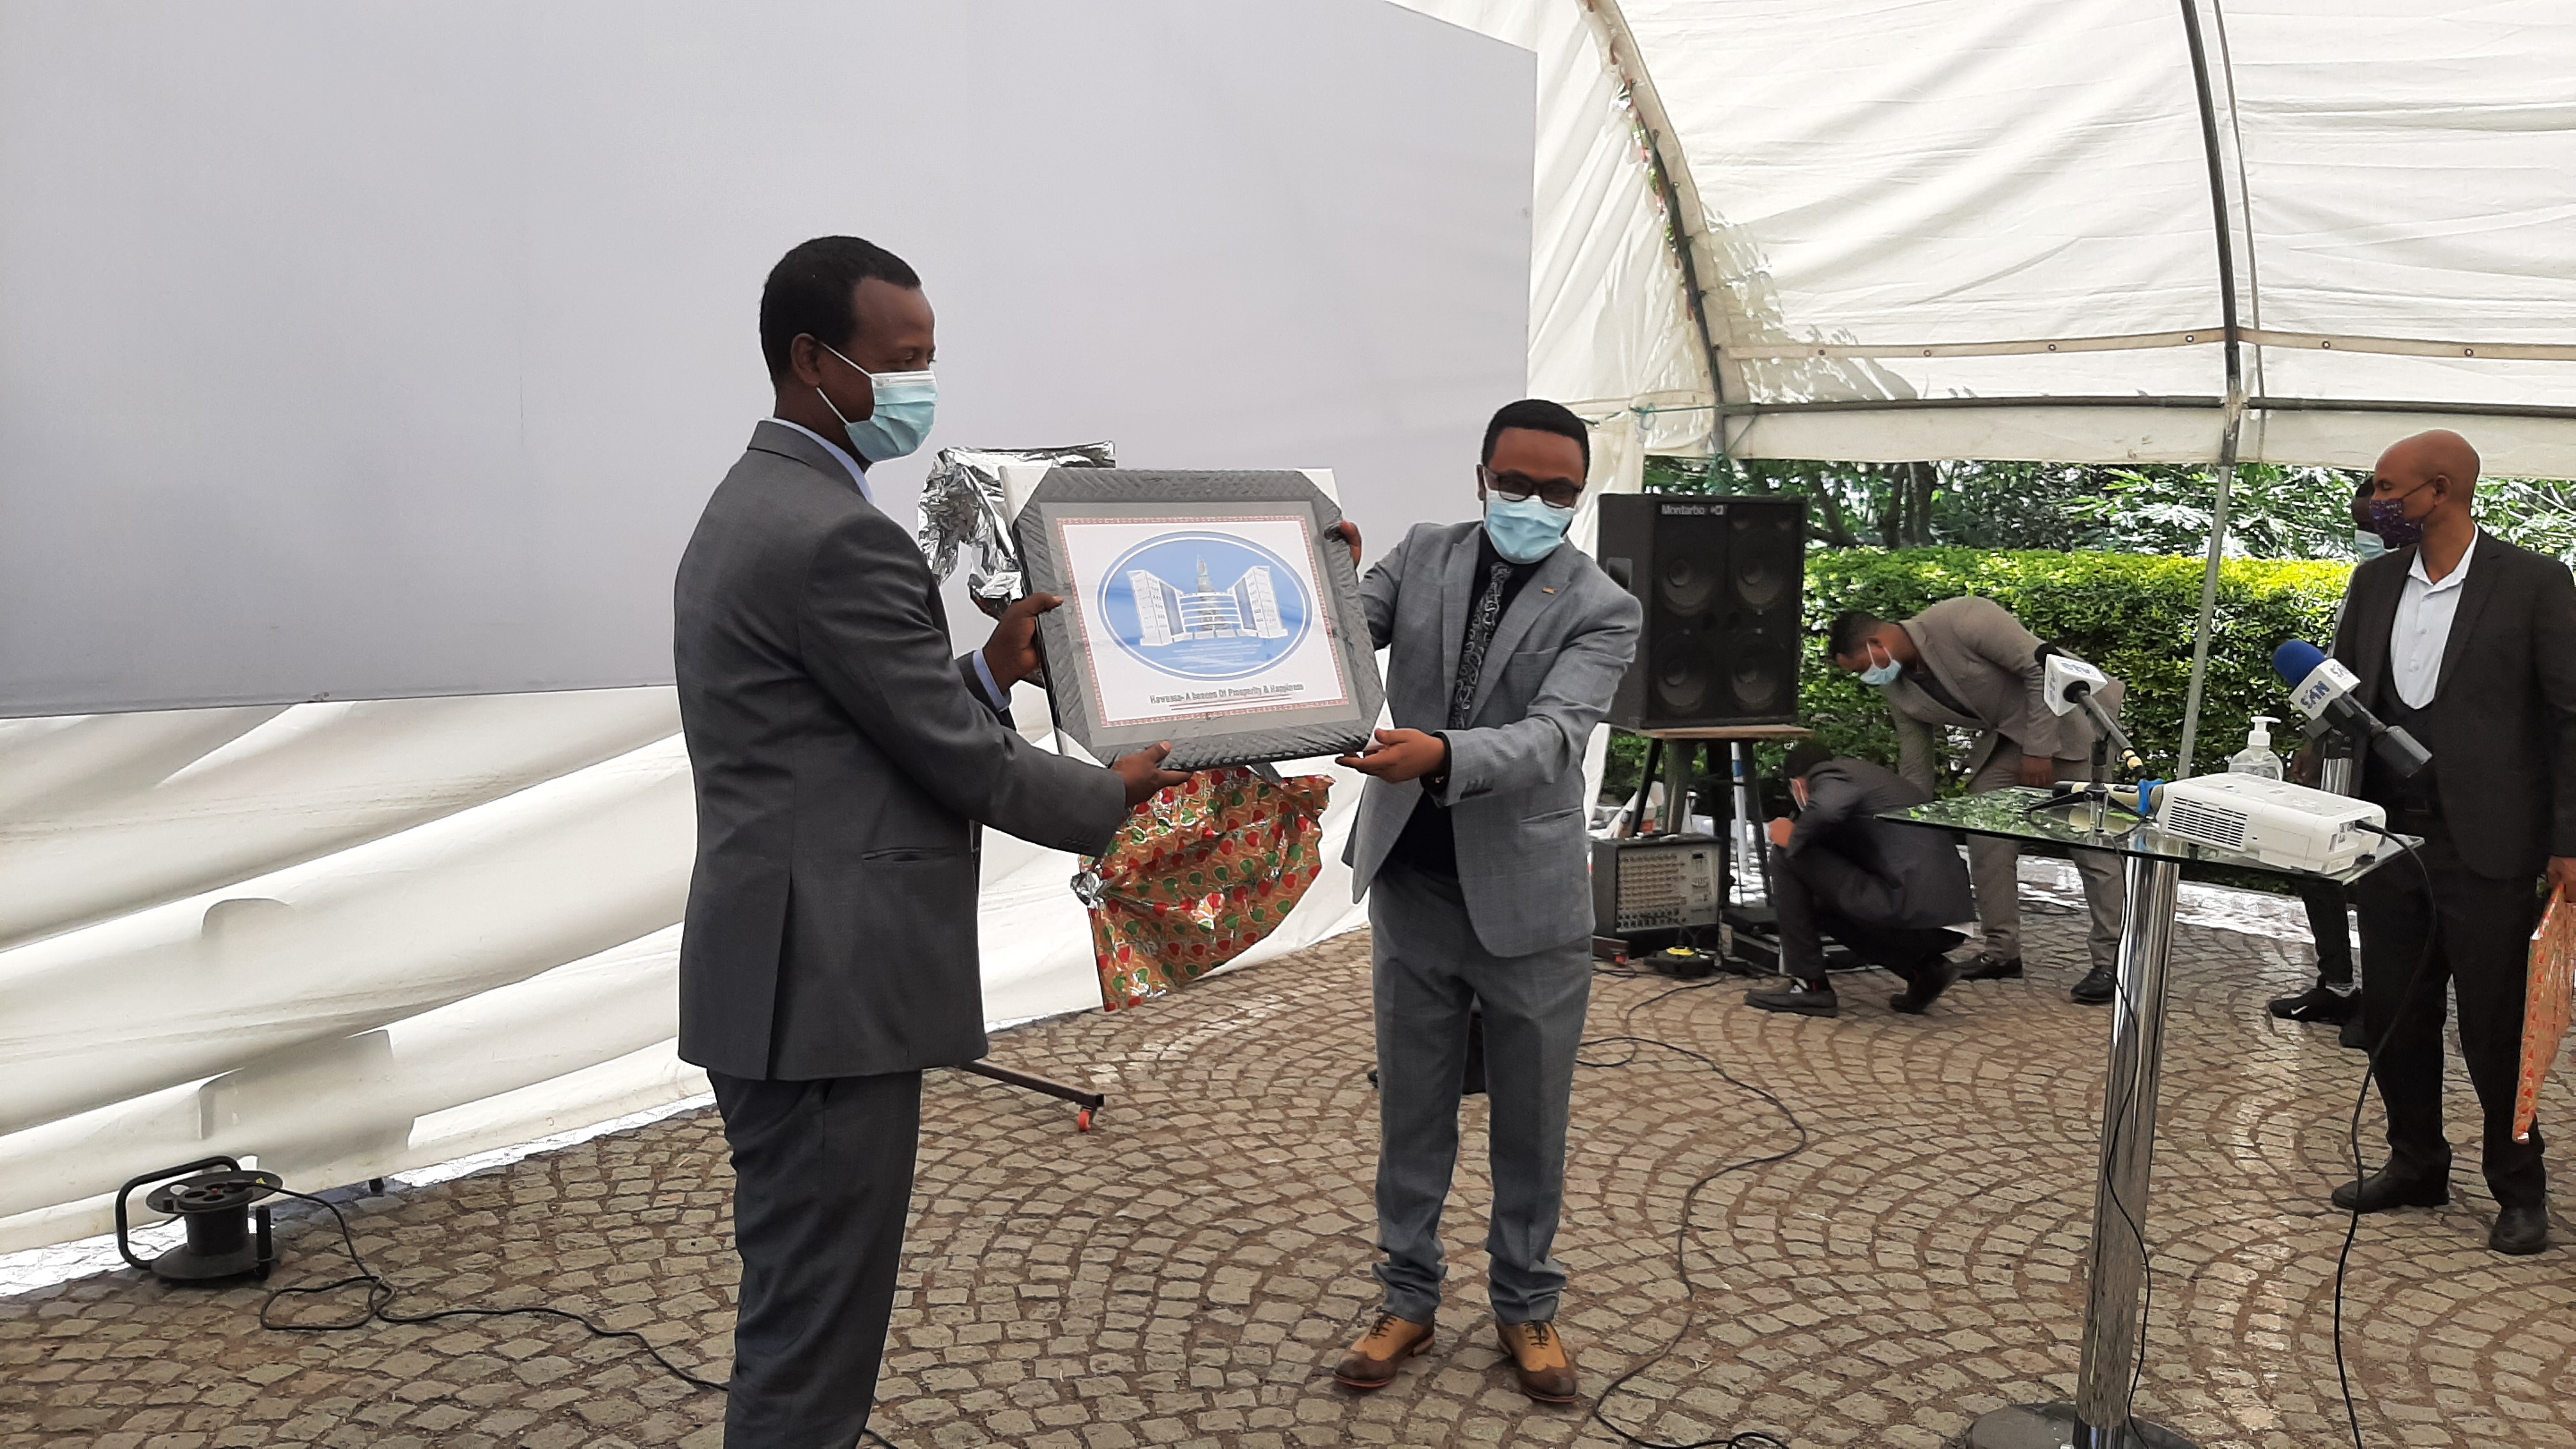 The Mayor of Hawassa, Tsegaye Tuke, hands over a plaque with the emblem of the city of Hawassa to Dr. Belay File of UN Habitat  as an appreciation for the partnership towards the revision of the  Hawassa City Structure Plan.